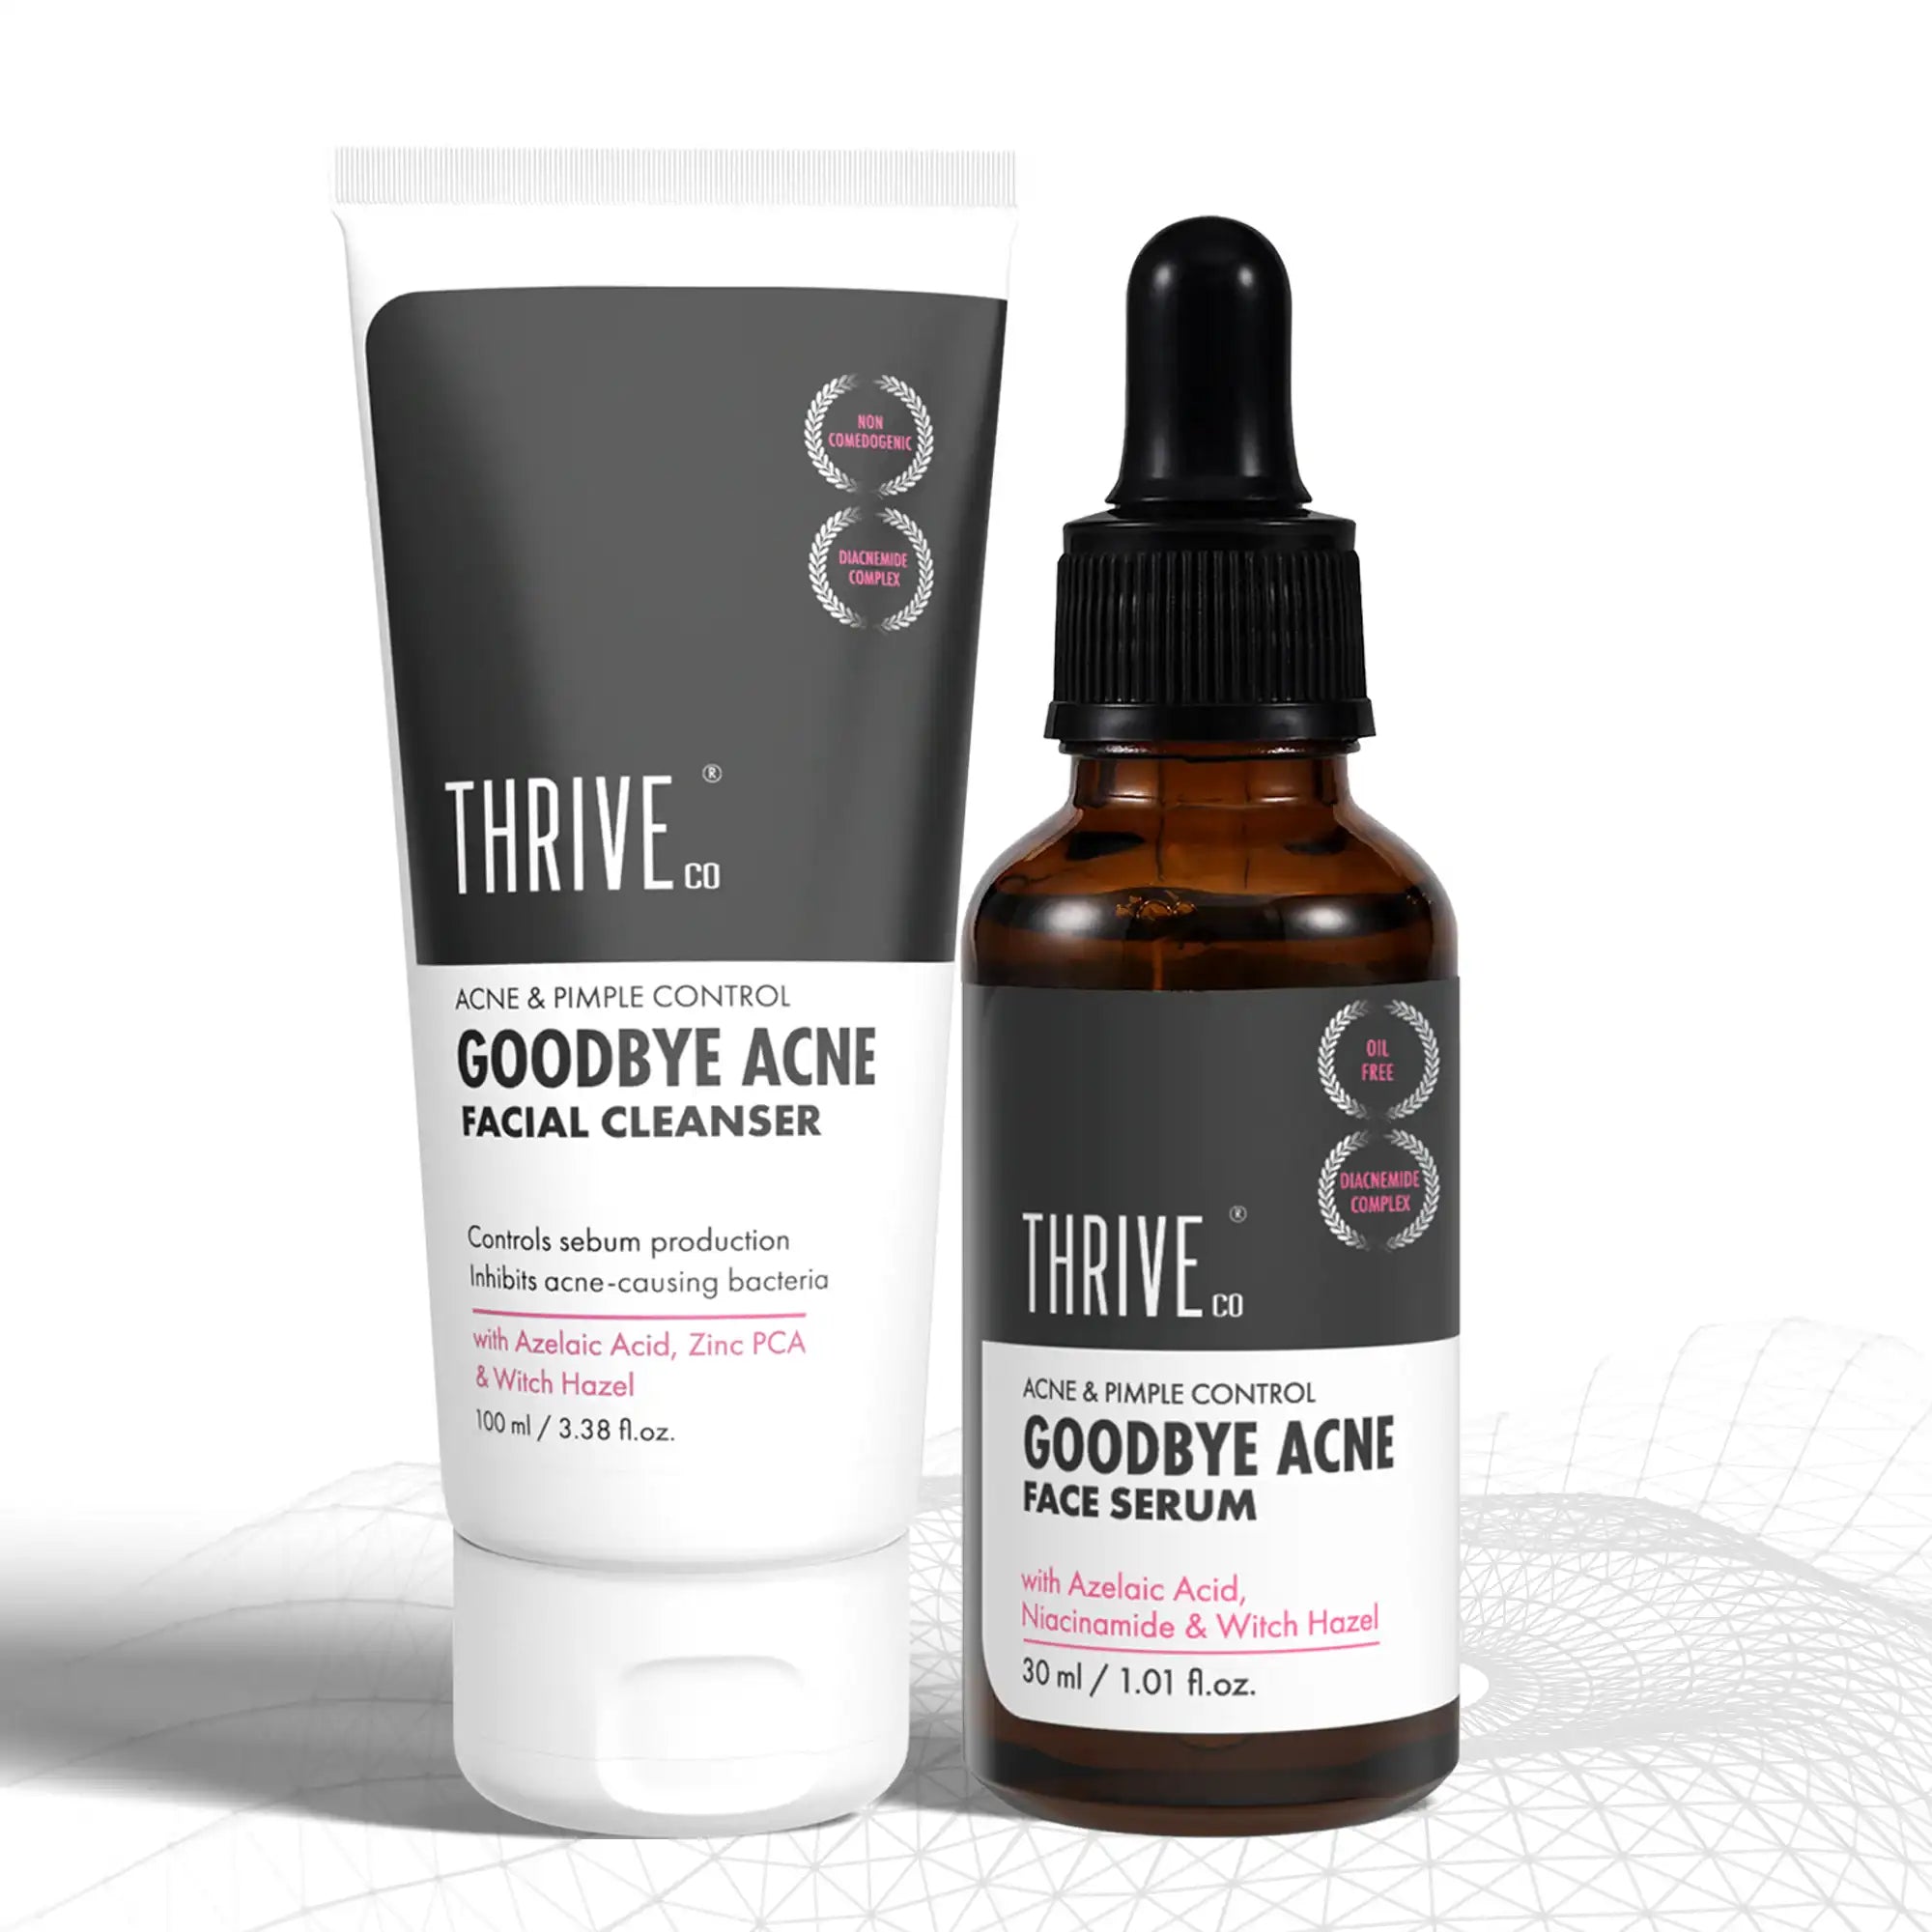 ThriveCo Goodbye Acne Kit for acne and pimple control